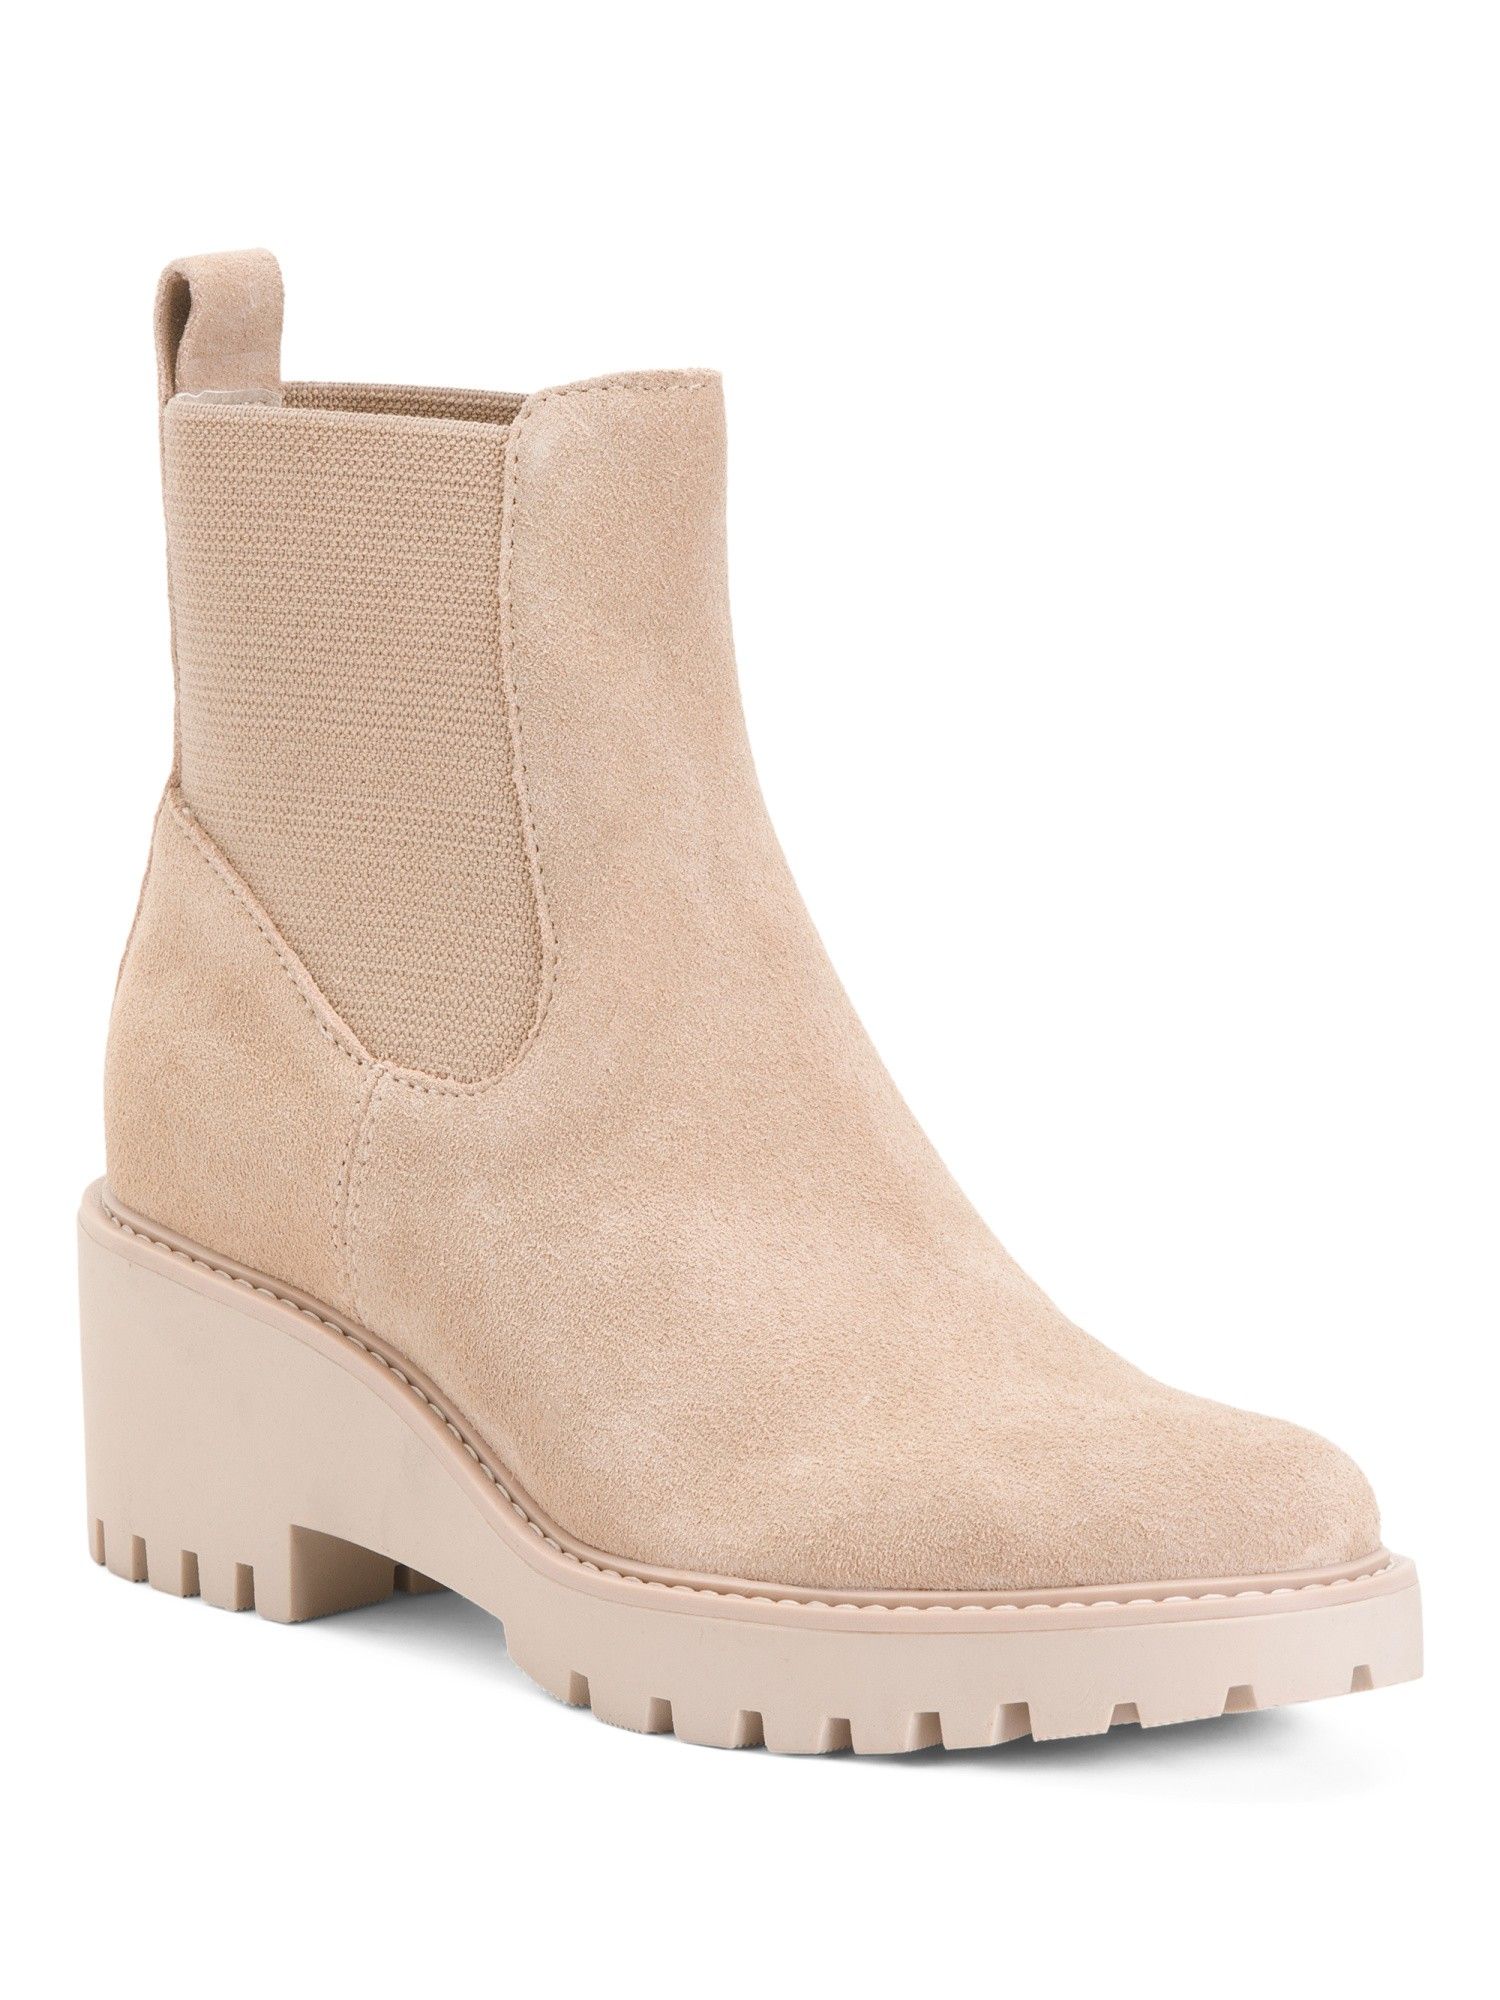 Suede Lug Sole Chelsea Boots | Women's Shoes | Marshalls | Marshalls